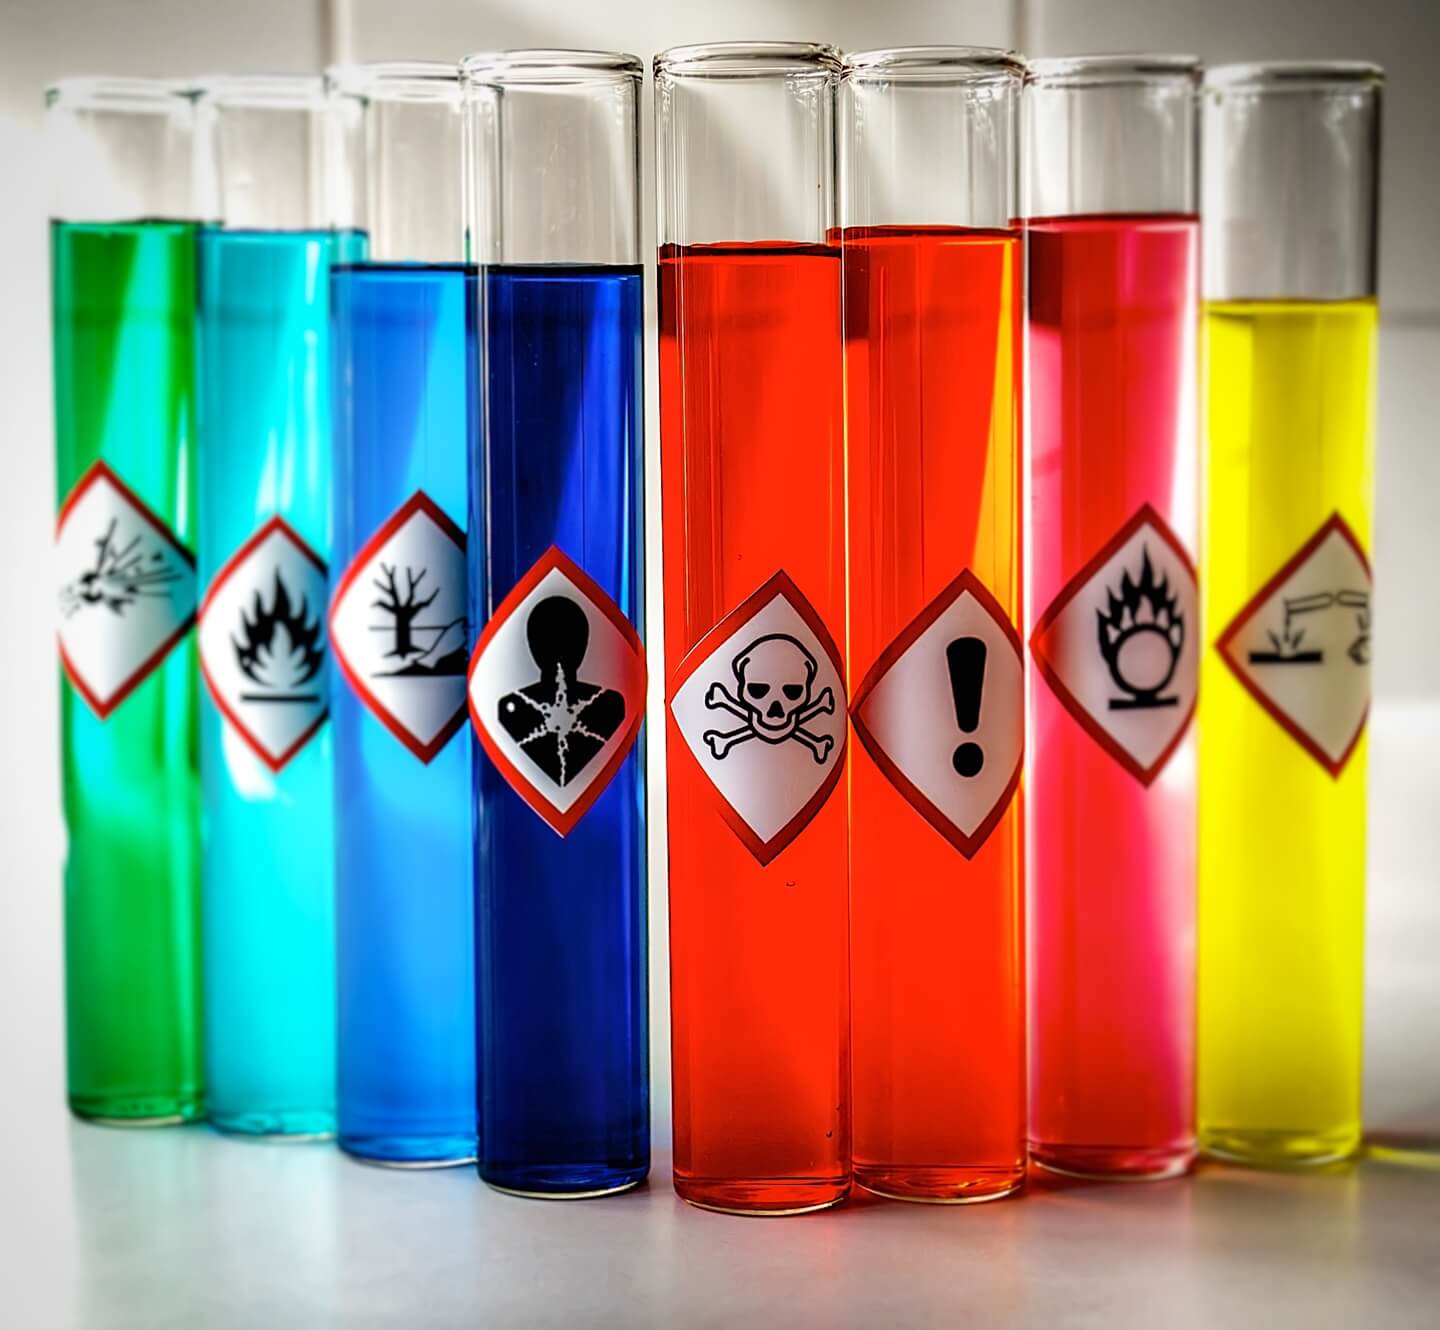 Vials of colored dangerous substances with attached warning pictograms